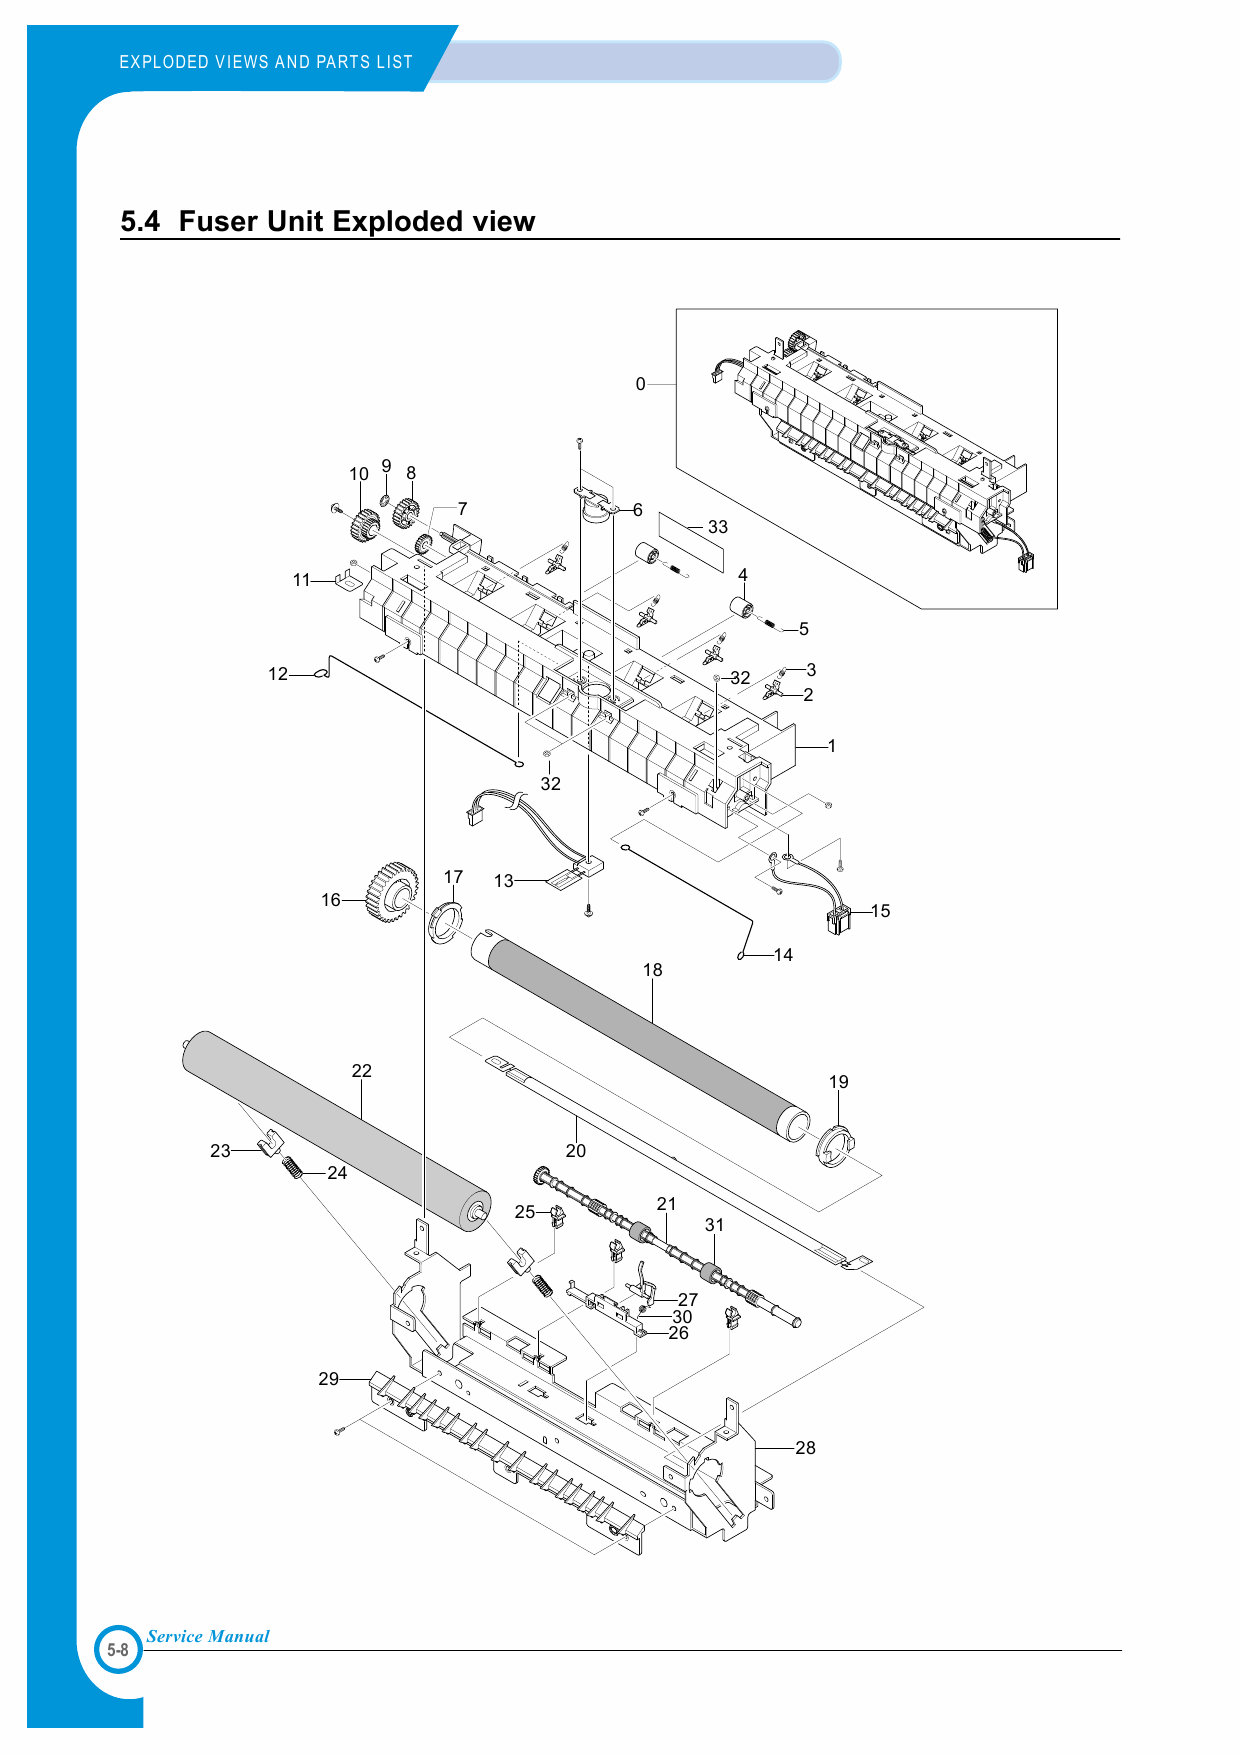 Xerox Phaser 3130 Parts List Manual-5